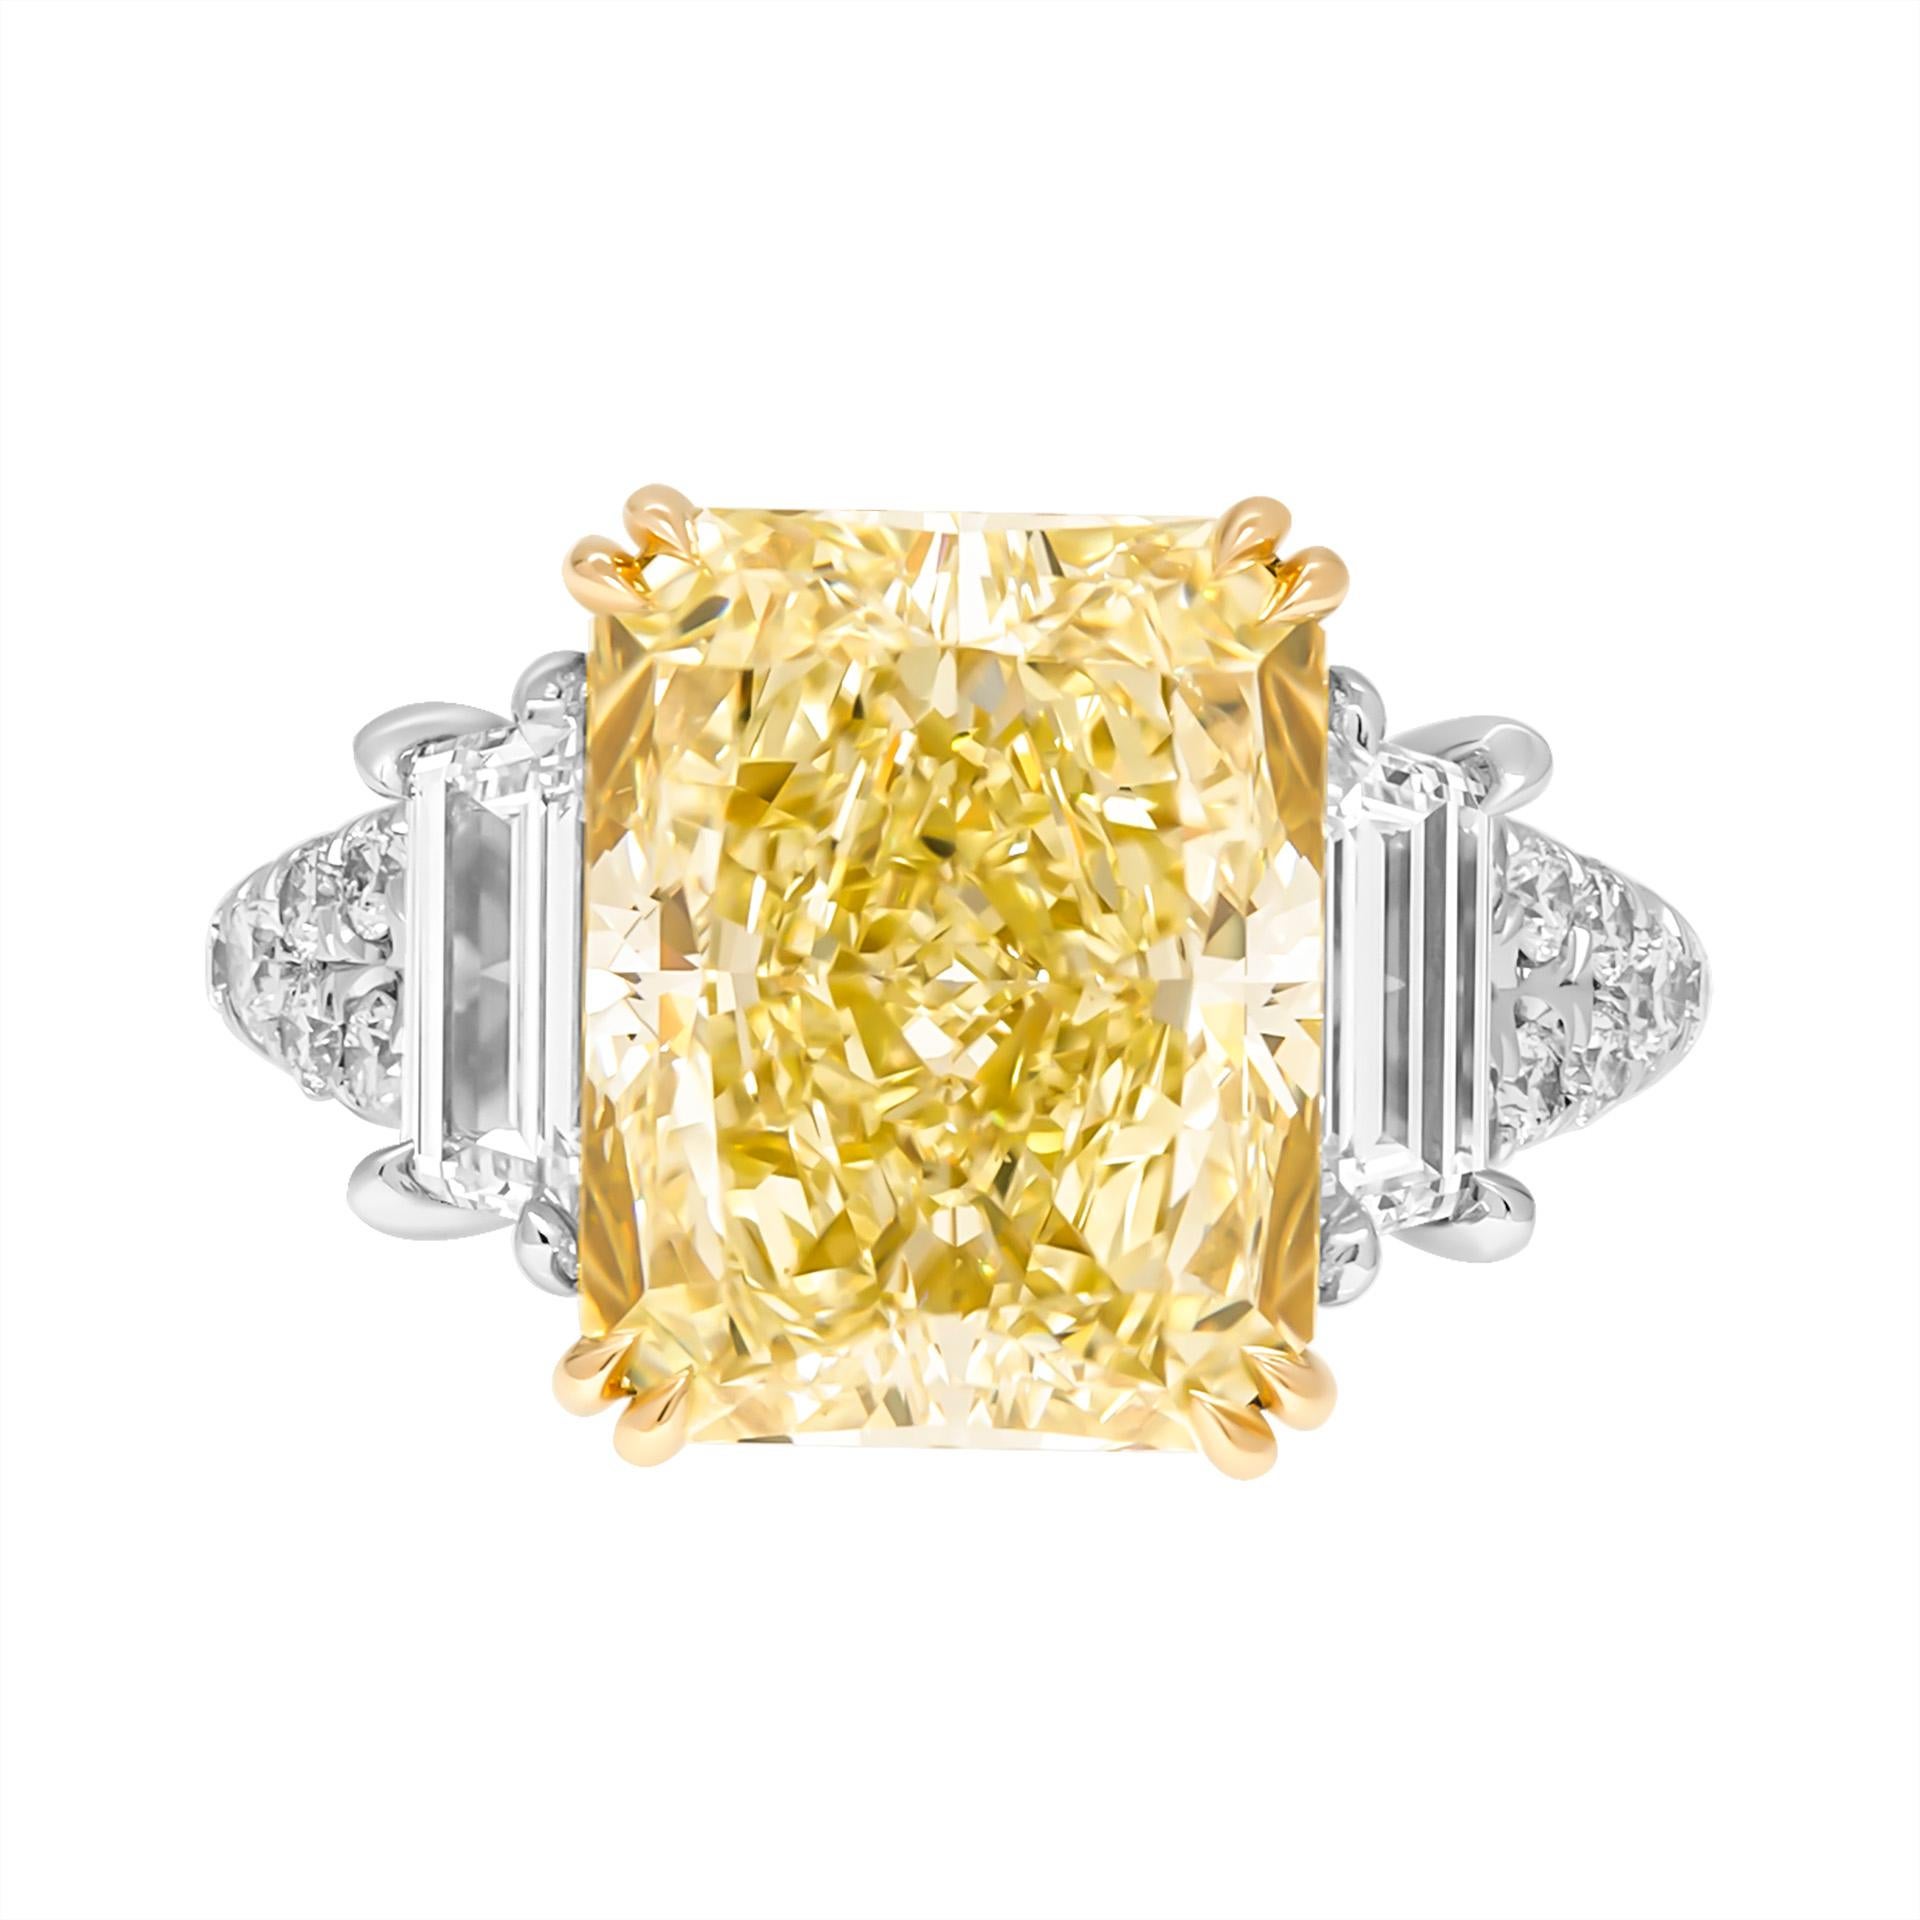 3 stone ring in Platinum & 18K Yellow Gold
Center: 6.86ct Natural Fancy Light Yellow Even VS2 Radiant Shape Diamond GIA#6224979207 

Side stones: 
Two side stones totaling 0.93ct E VVS trapezoids 
Total Carat Weight of Yellow melee stones: